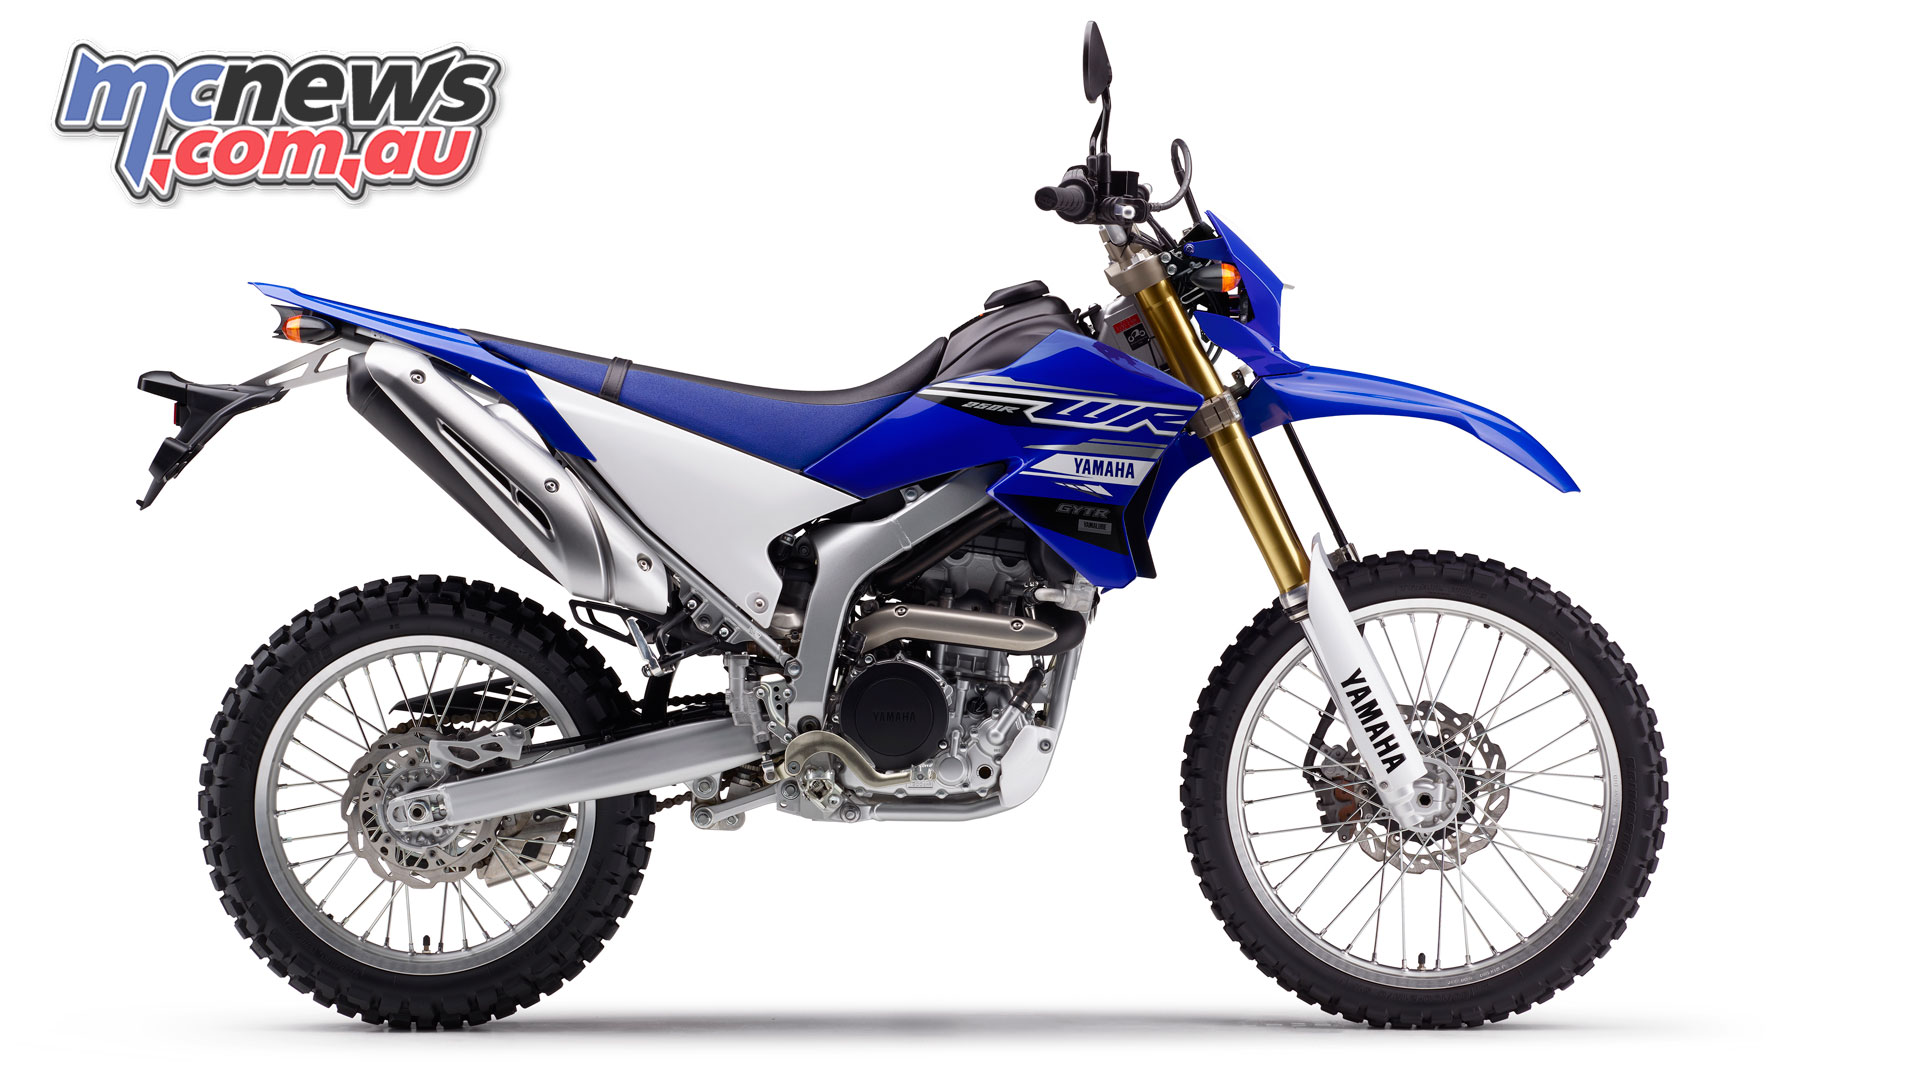 2020 Yamaha WR250R - Available now for $9599 incl GST ride away